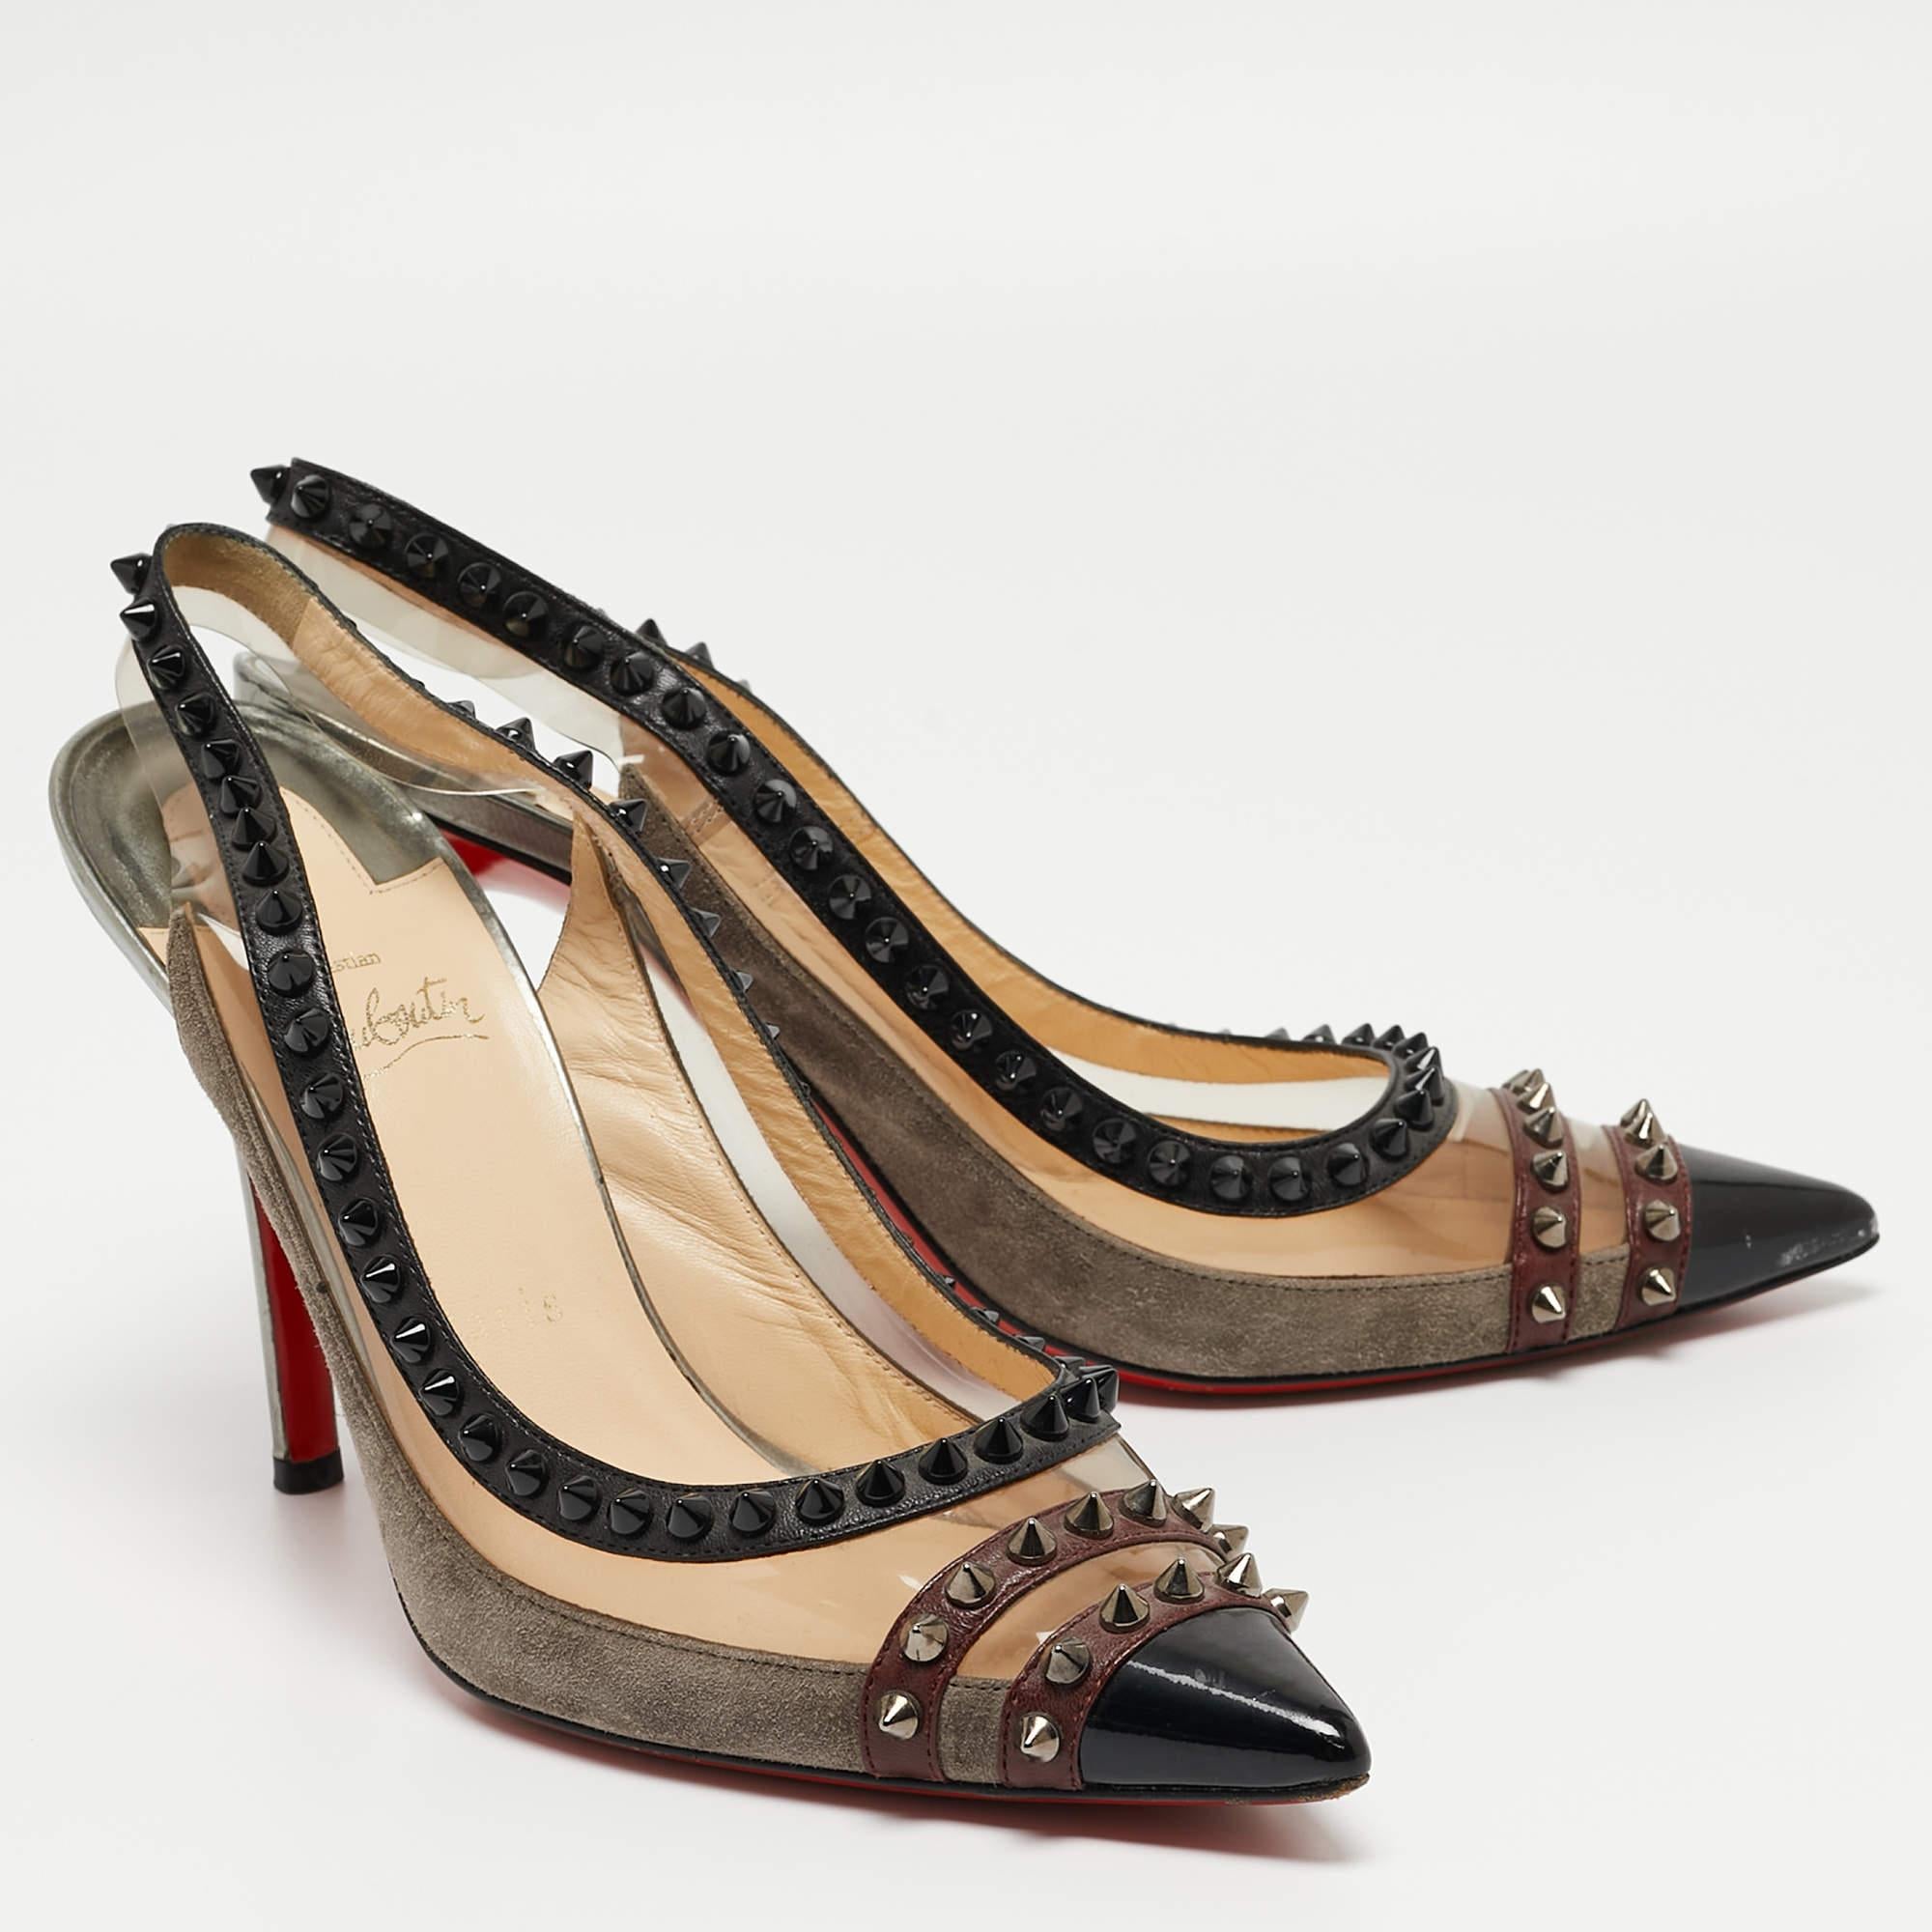 Christian Louboutin Tricolor Suede and PVC Paulina Slingback Pumps Size 39 In Good Condition For Sale In Dubai, Al Qouz 2